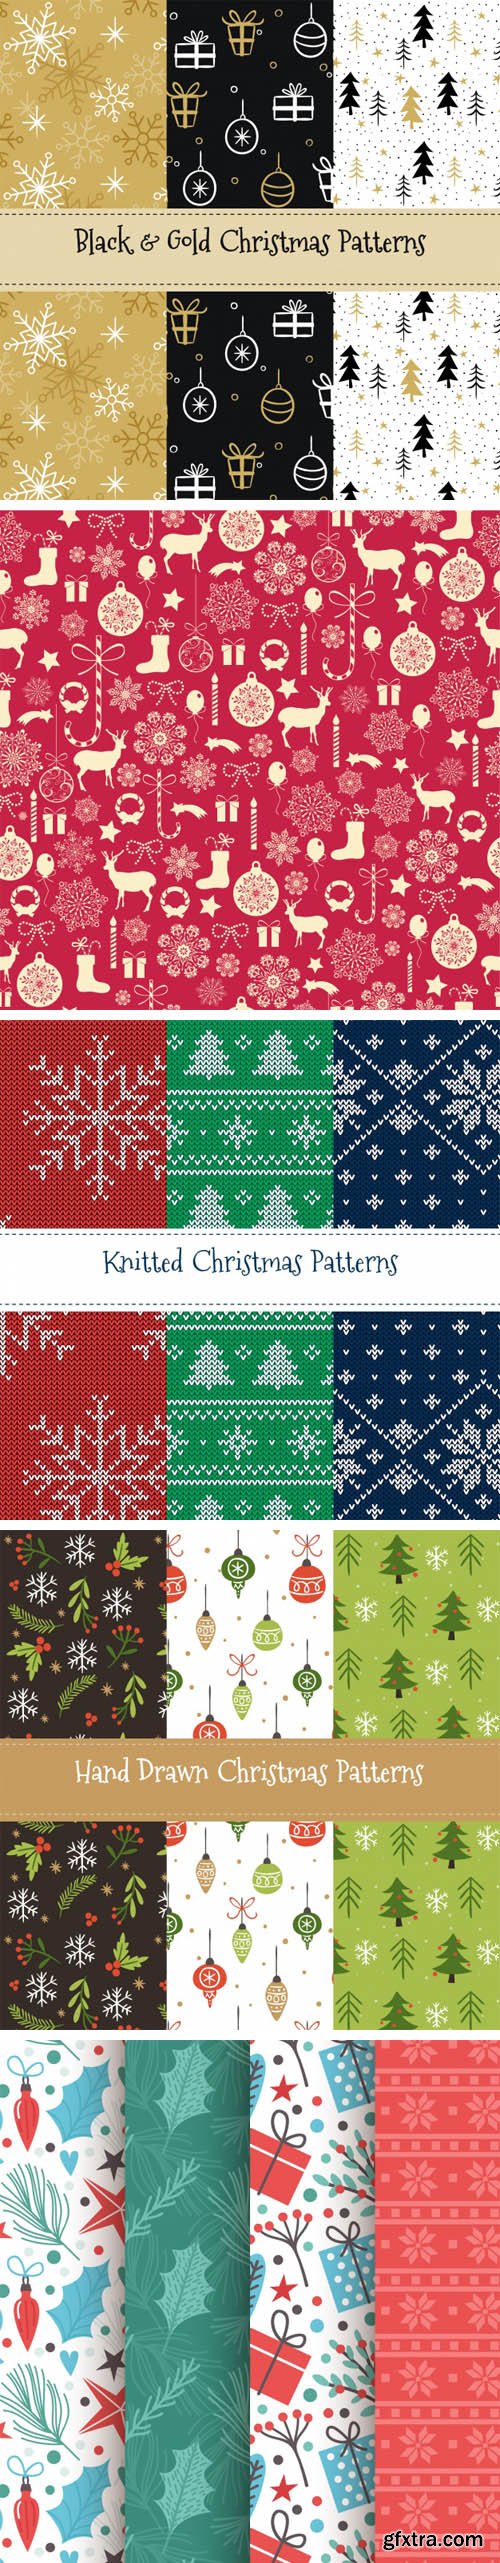 Christmas Patterns Vector Collection 4